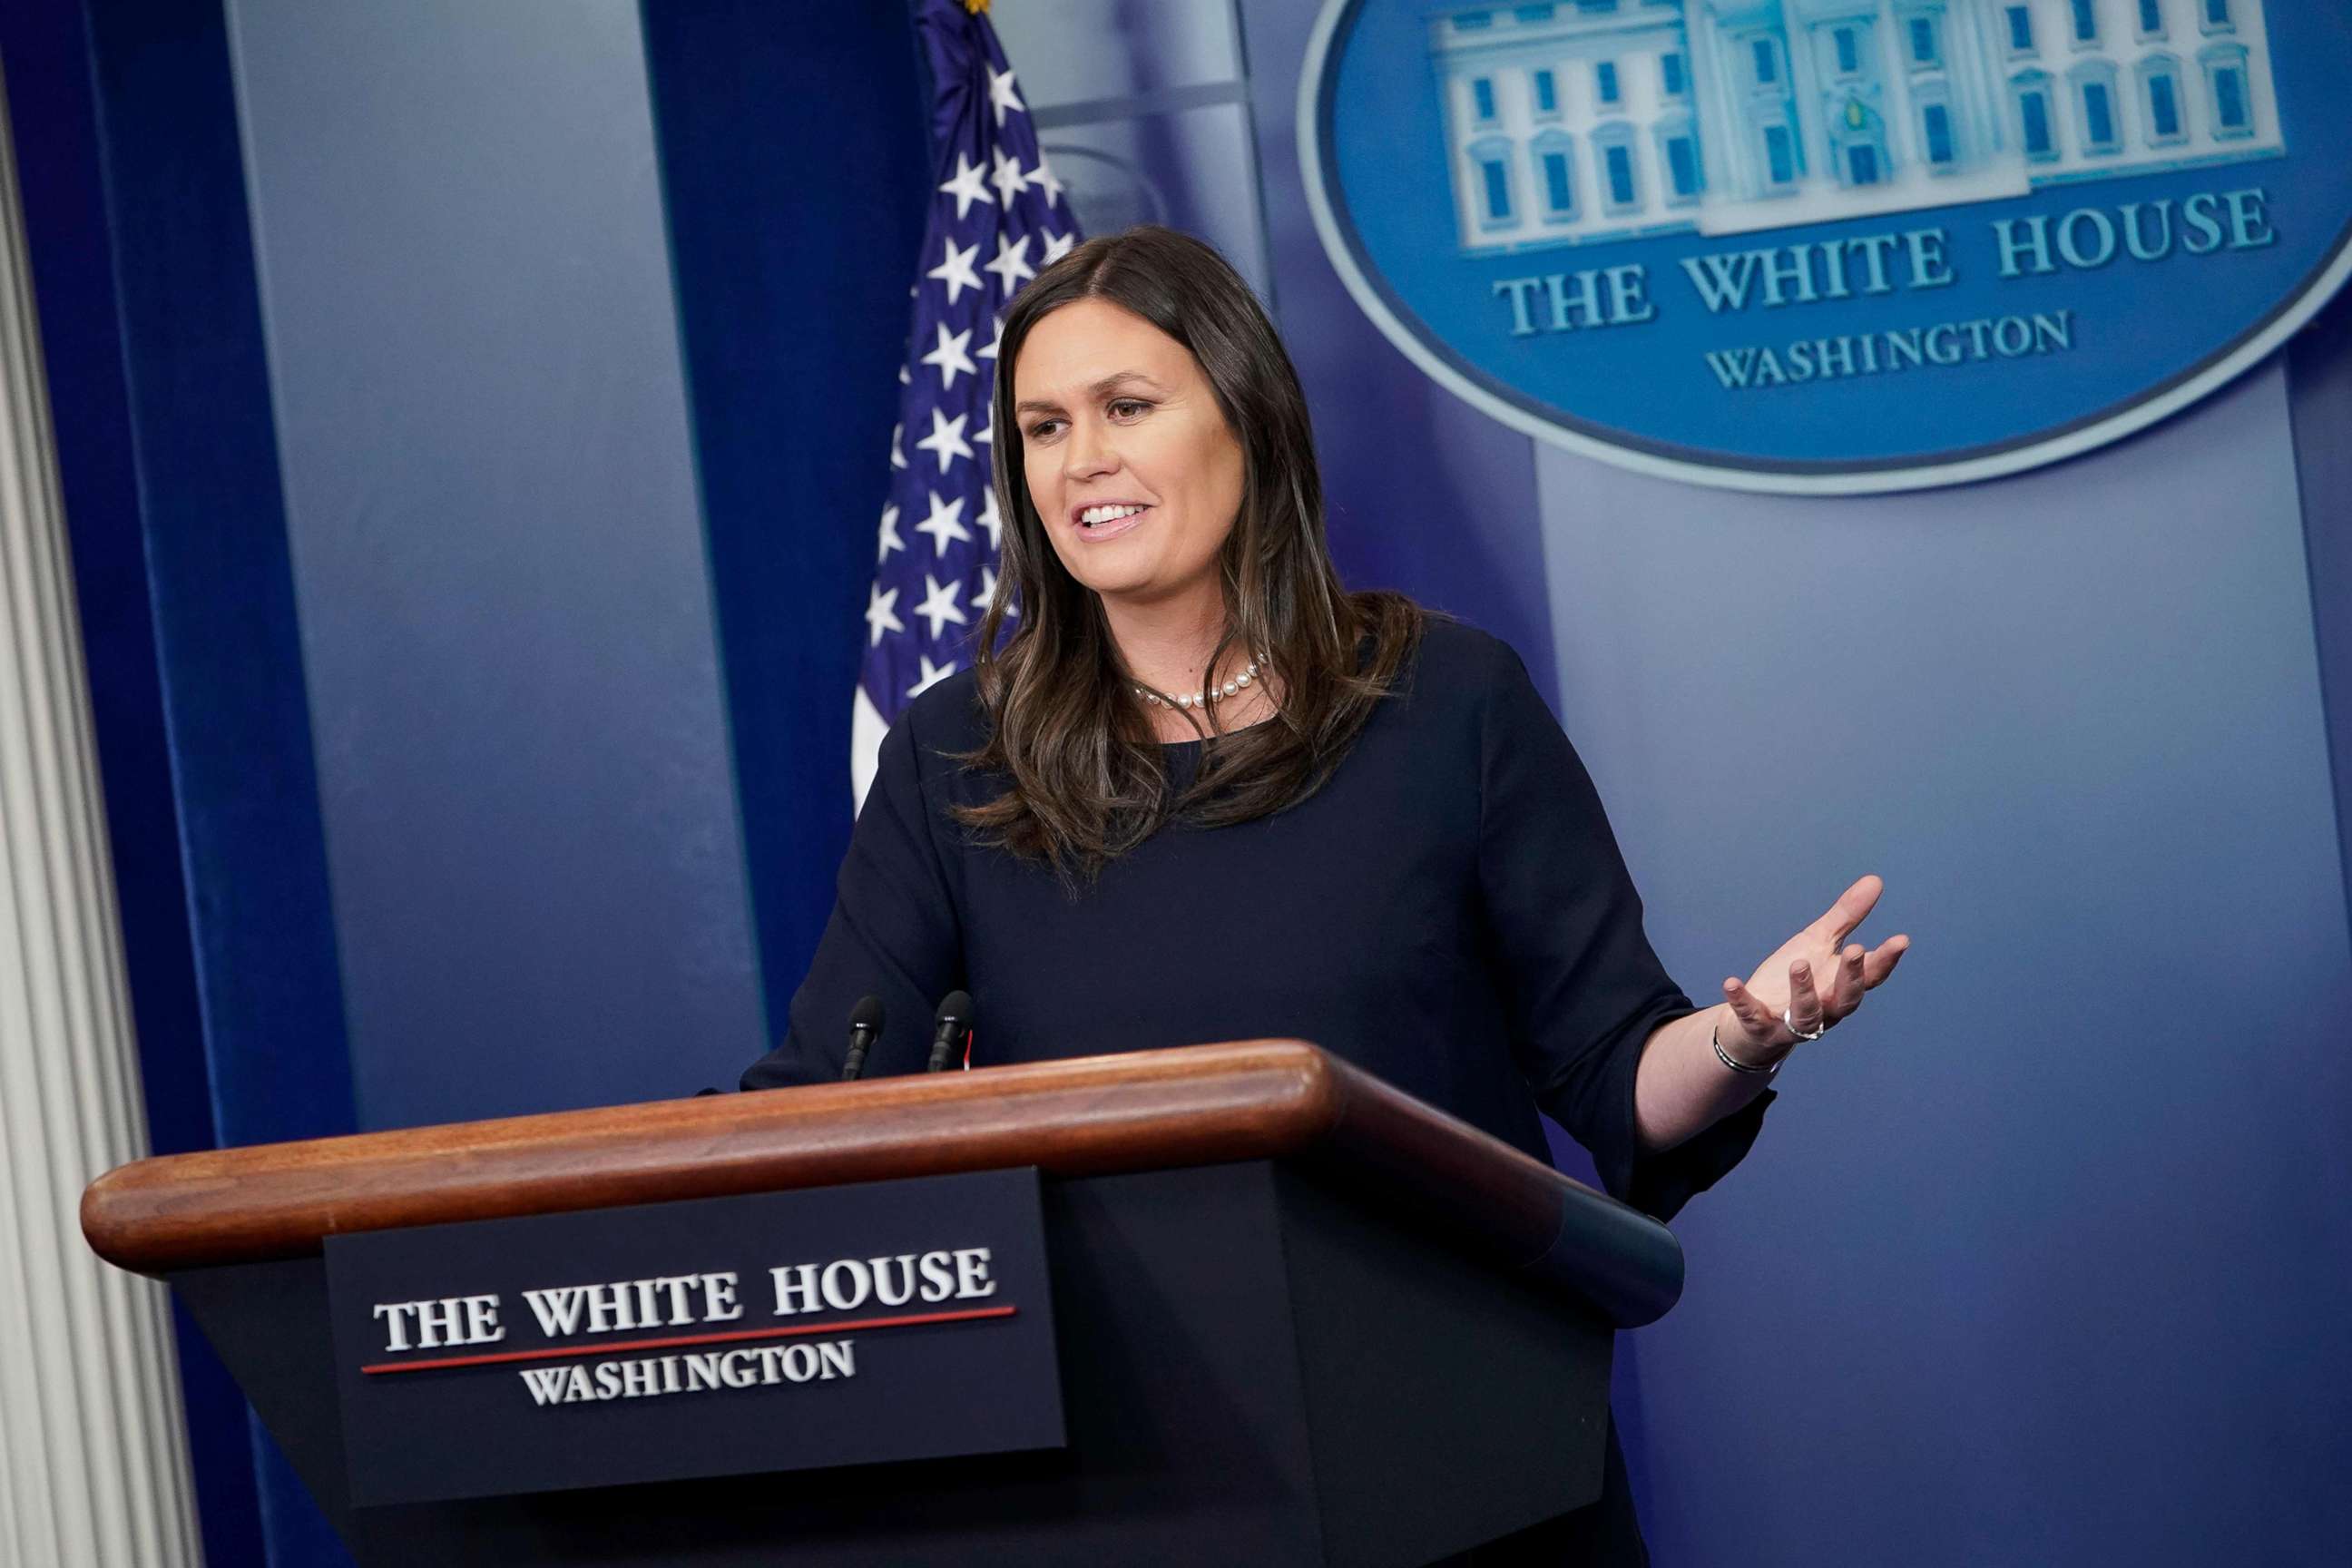 PHOTO: White House Press Secretary Sarah Sanders speaks during the daily briefing in the Brady Briefing Room of the White House, April 13, 2018 in Washington, D.C.